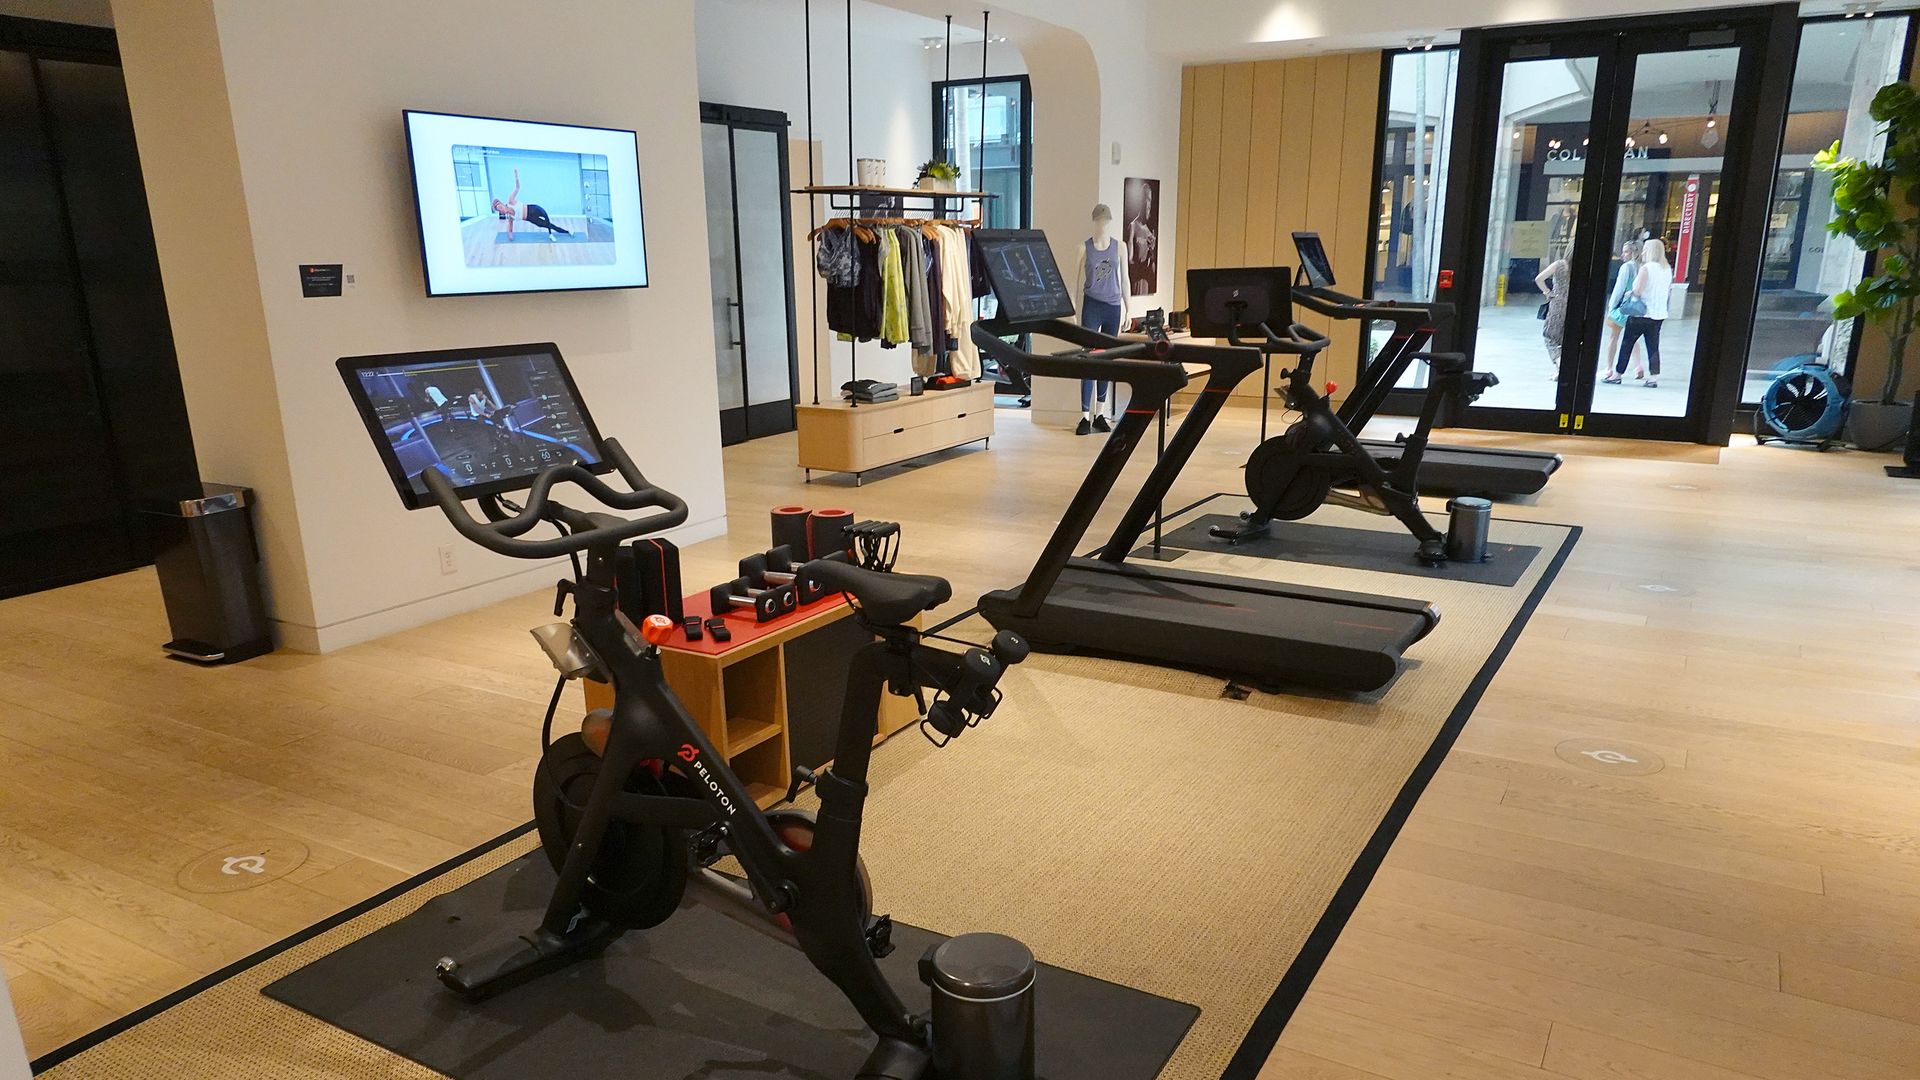 A Peloton show room displays bikes and treadmills. Photo by Joe Raedle/Getty Images